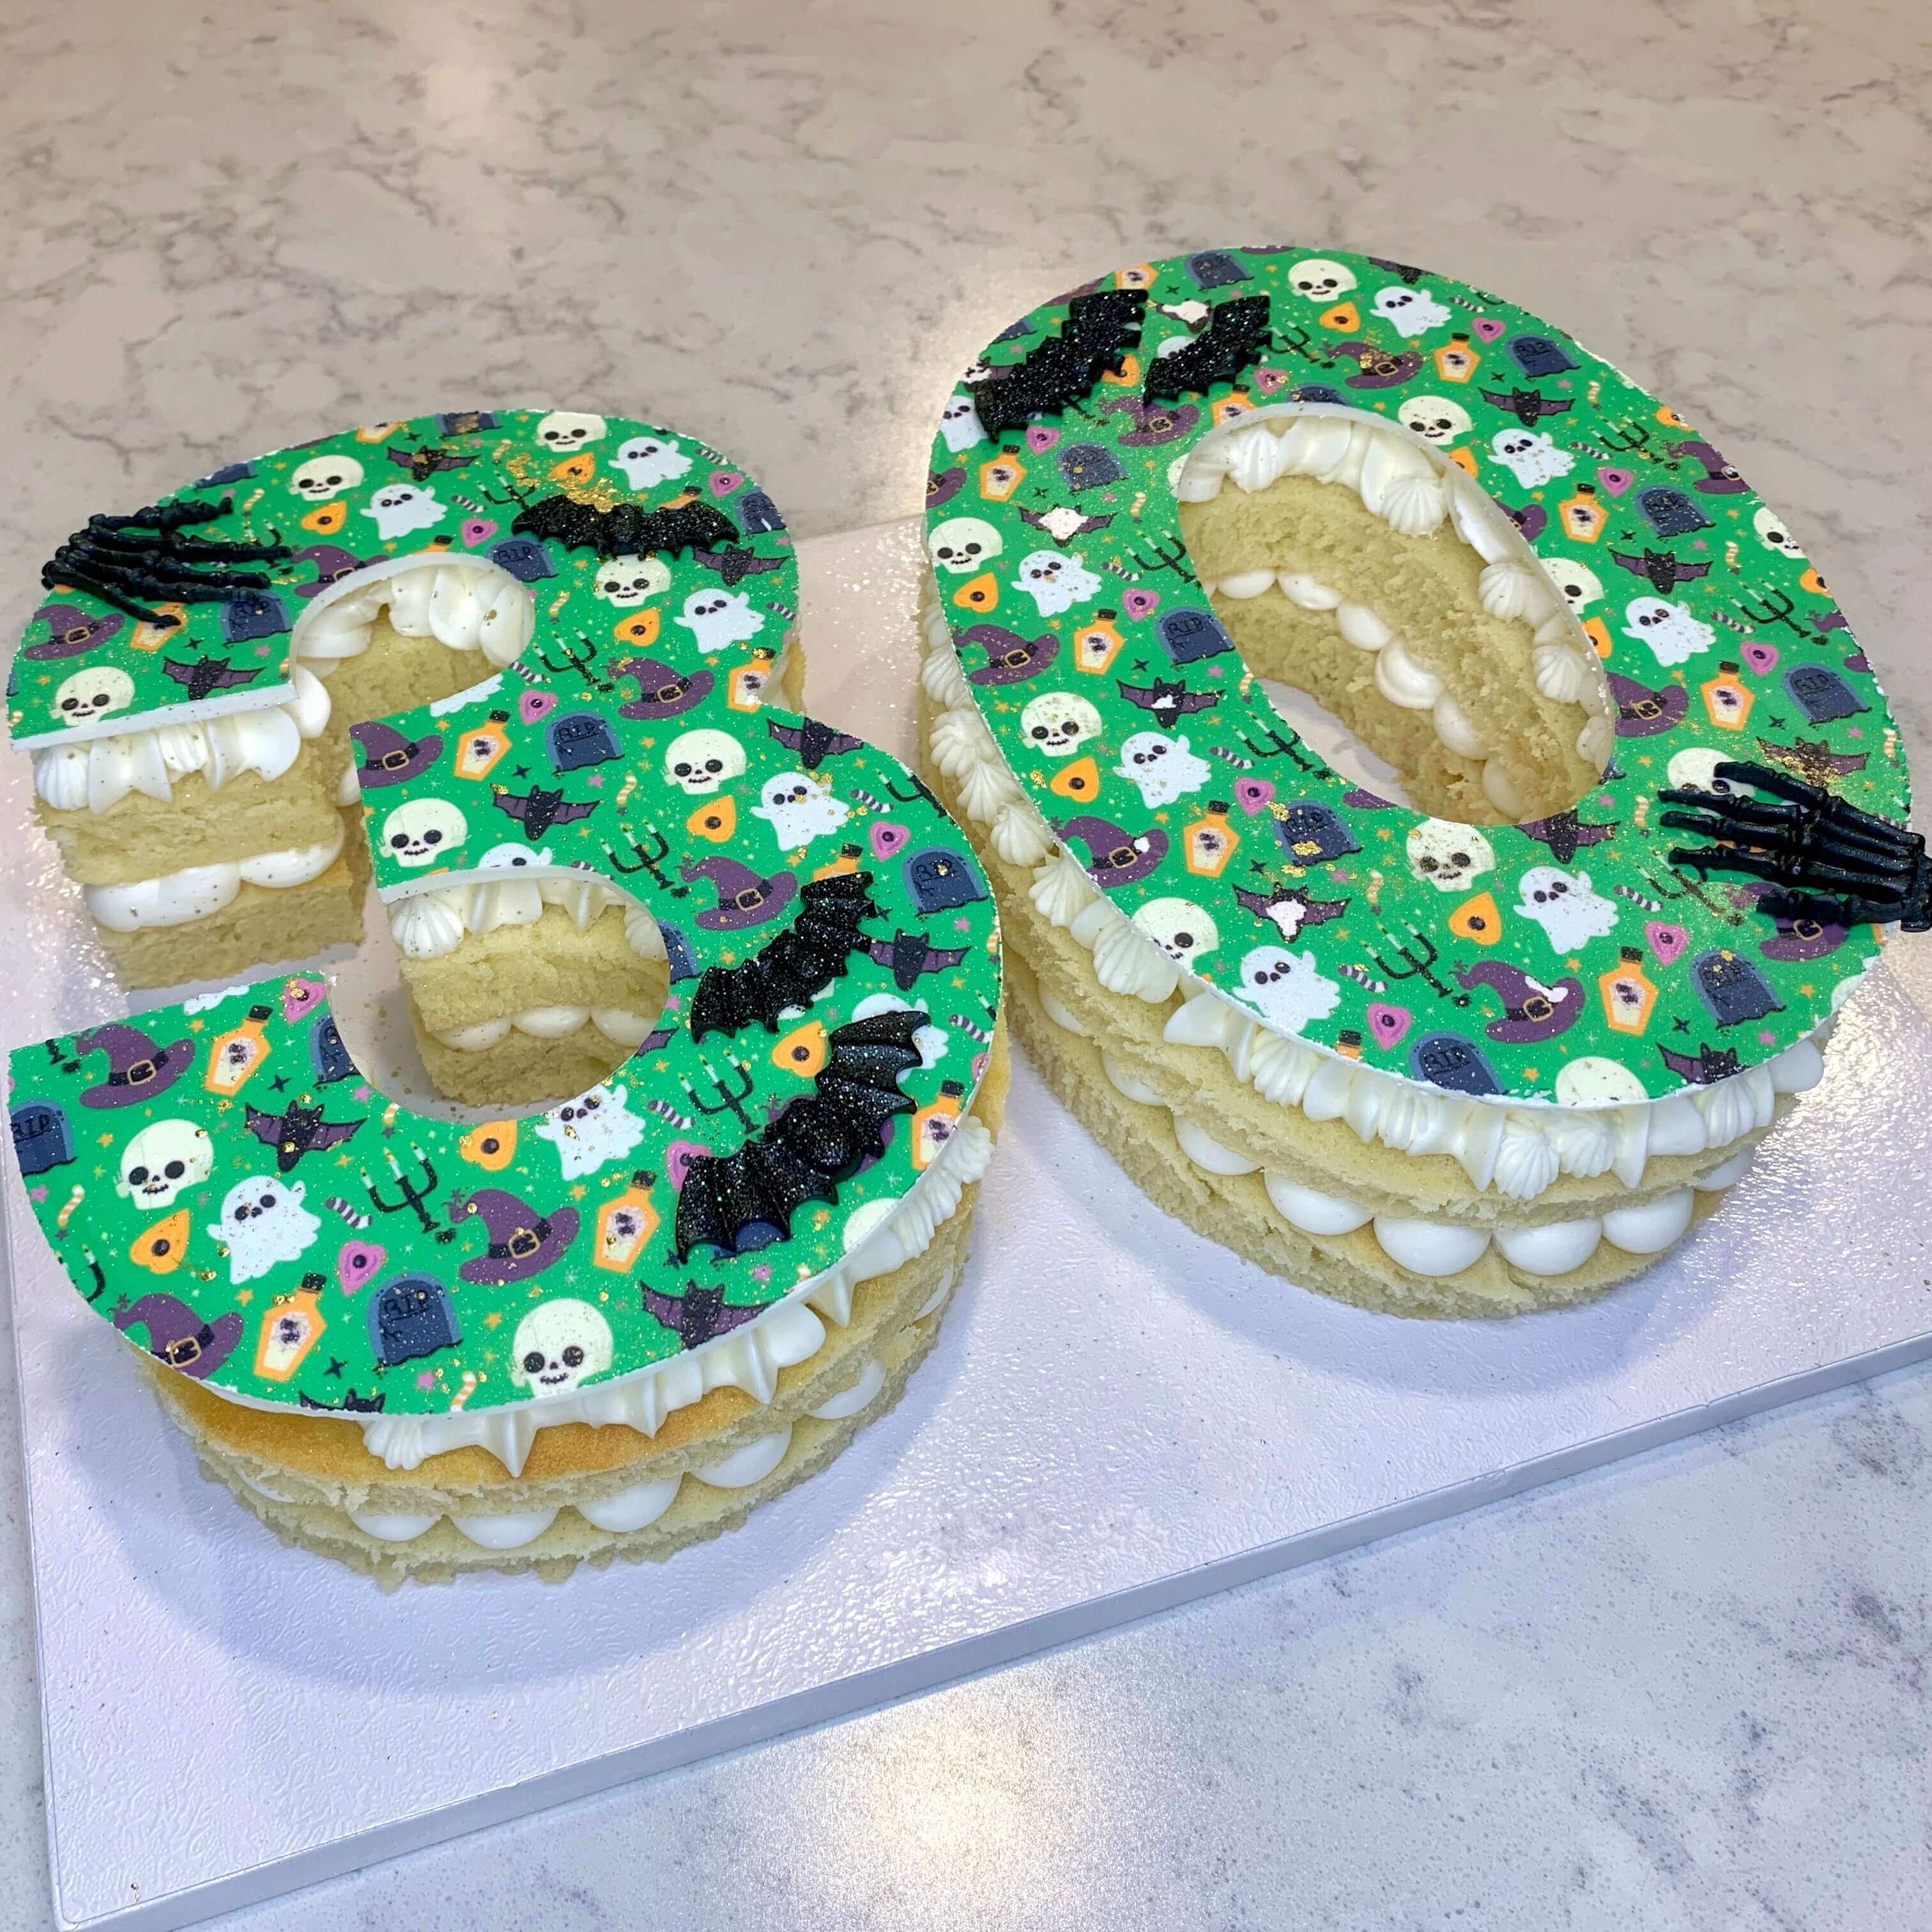 8 Race Track by Cindy – FAILSAFE (or close) Decorated Cakes — Home-made  decorated cakes, with low salicylate, amine and glutamate, and no bad  additives.